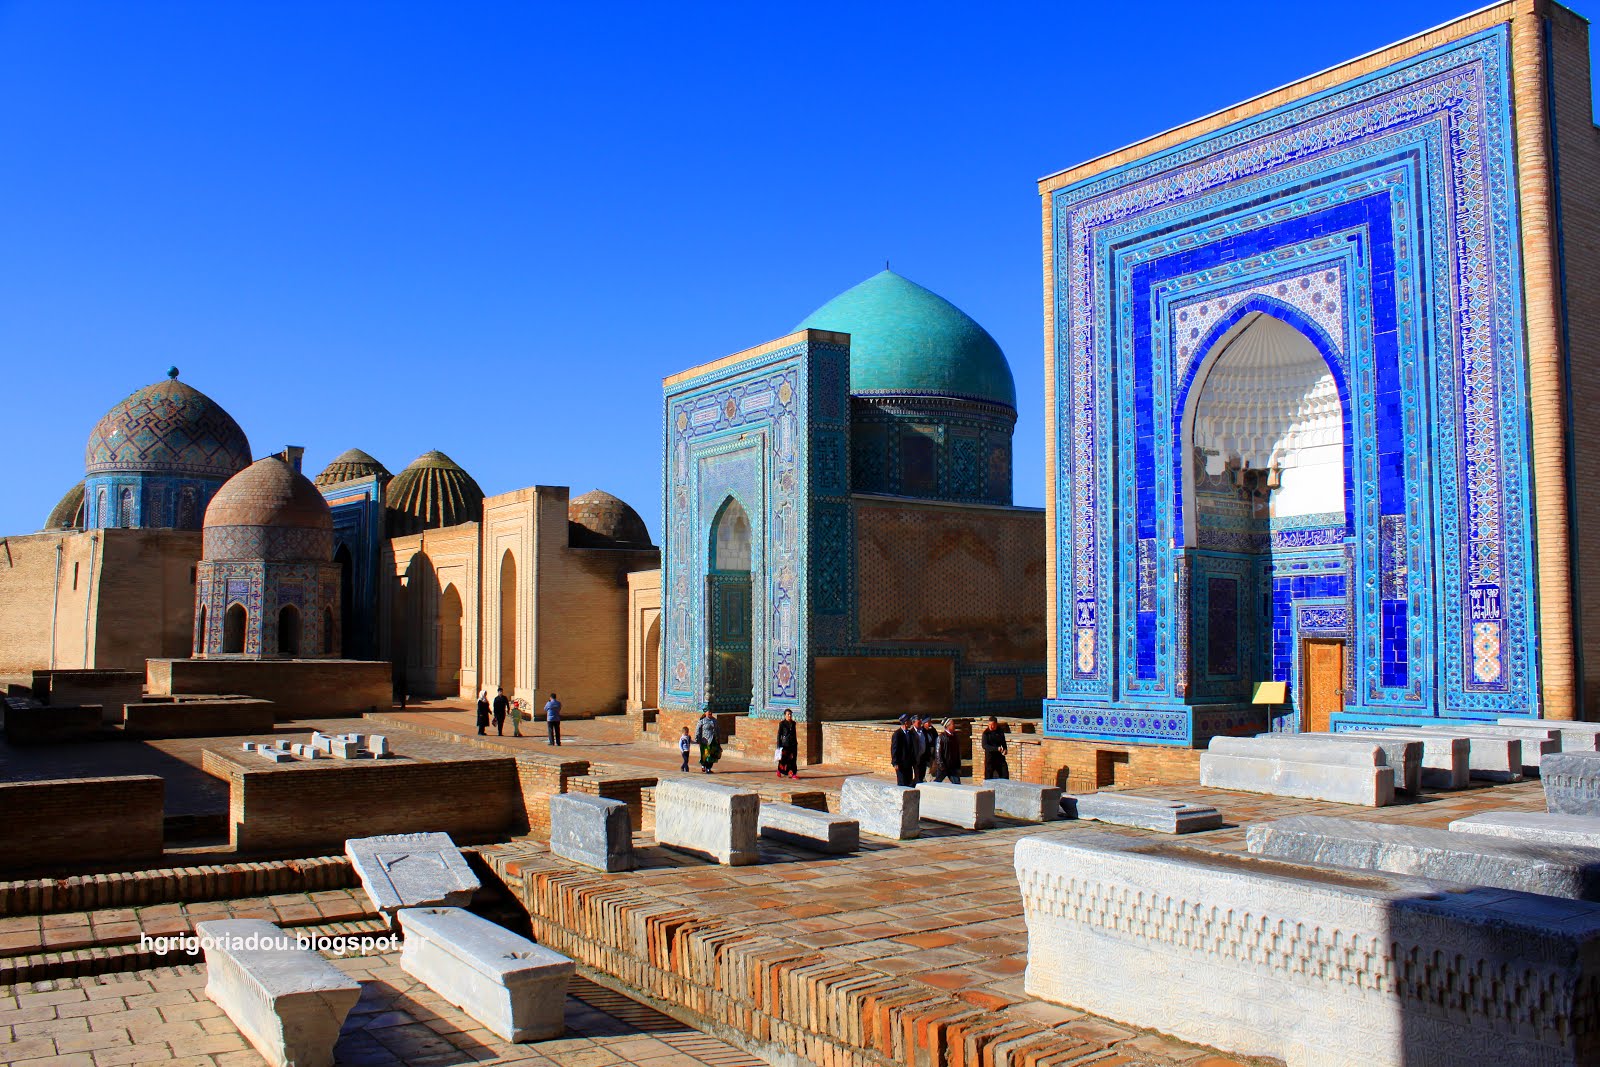 Samarkand: the Gem of the East